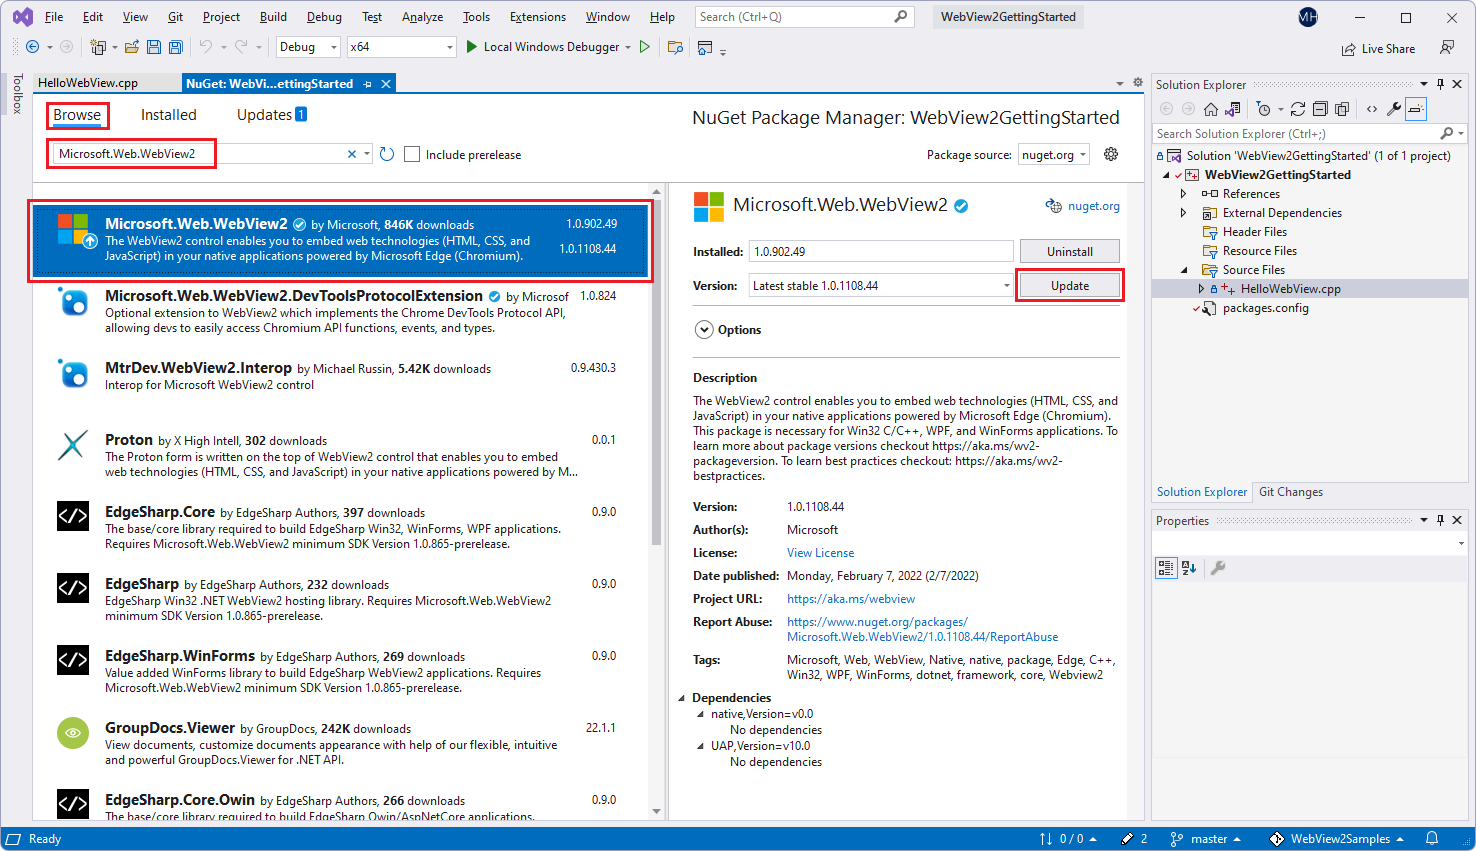 Selecting the 'Microsoft.Web.WebView2' package in NuGet Package Manager in Visual Studio